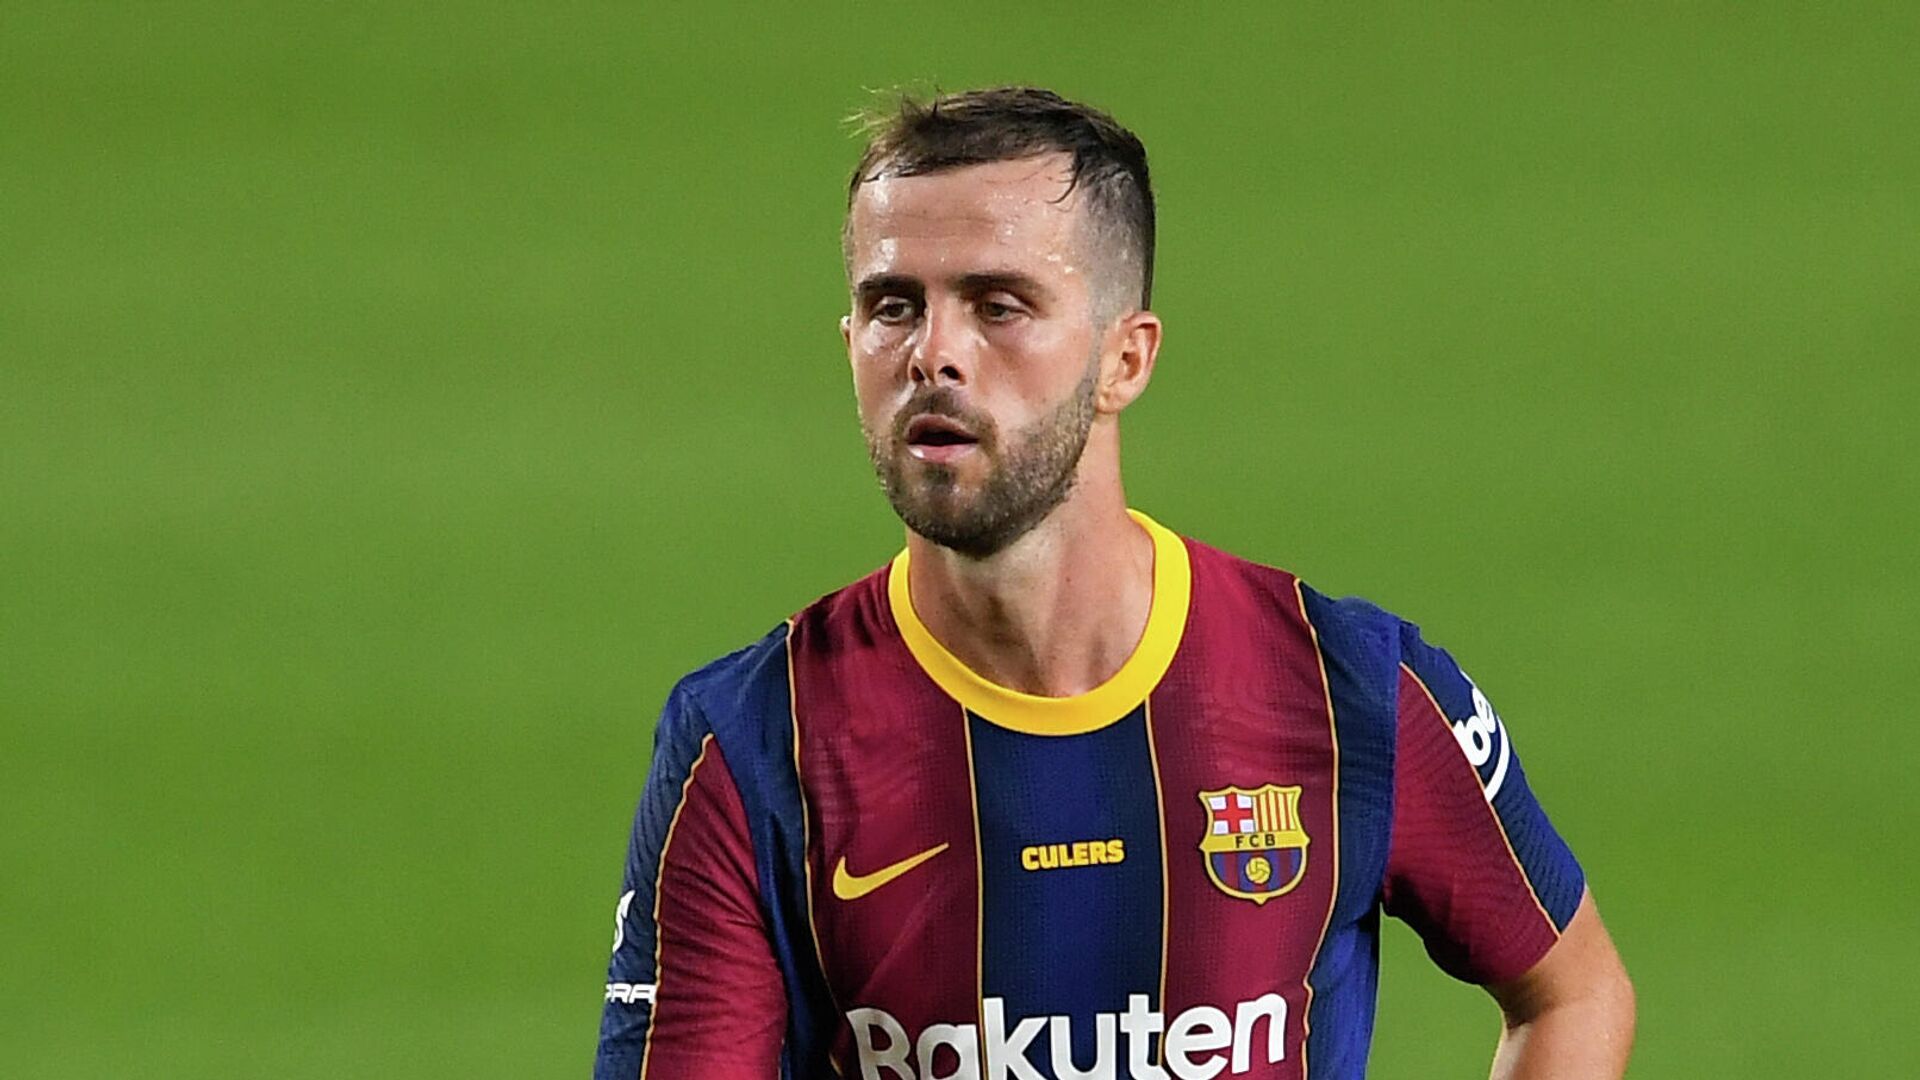 Barcelona's Bosnian midfielder Miralem Pjanic walks on the pitch during the 55th Joan Gamper Trophy friendly football match between Barcelona and Elche at the Camp Nou stadium in Barcelona on September 19, 2020. (Photo by Josep LAGO / AFP) - РИА Новости, 1920, 03.09.2021